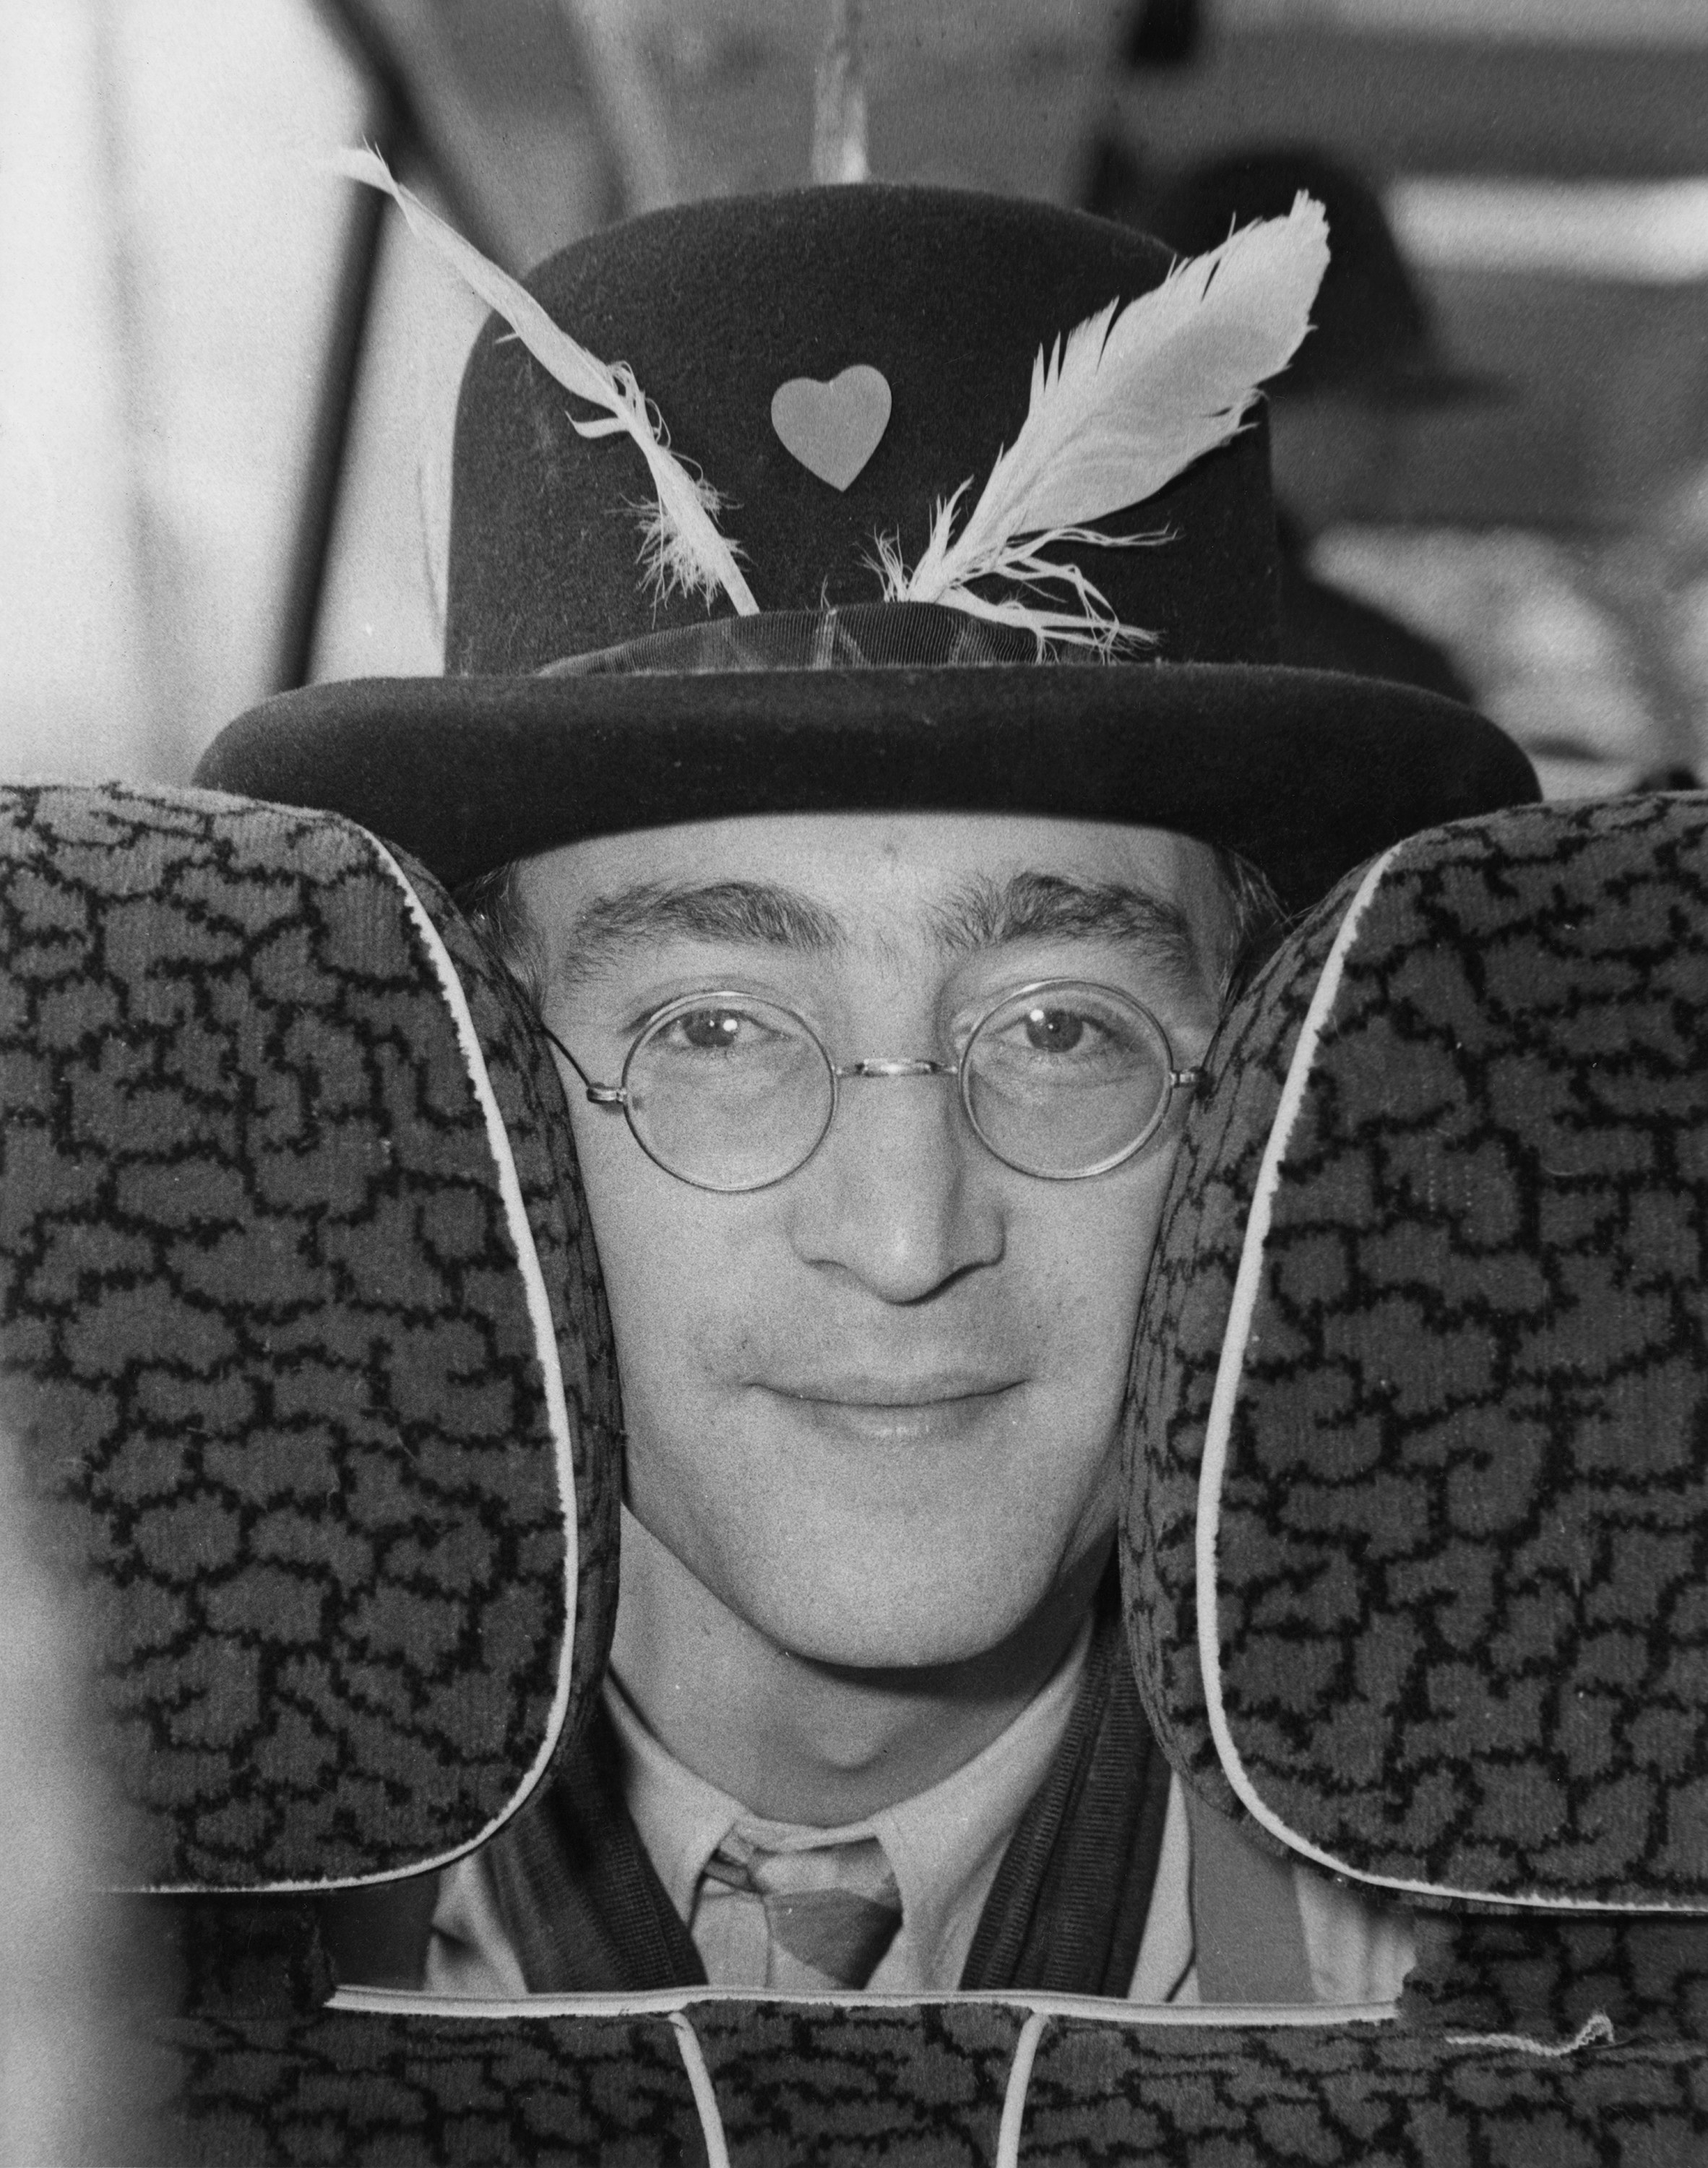 John Lennon with his face squished between two seat headrests wearing a hat with feathers